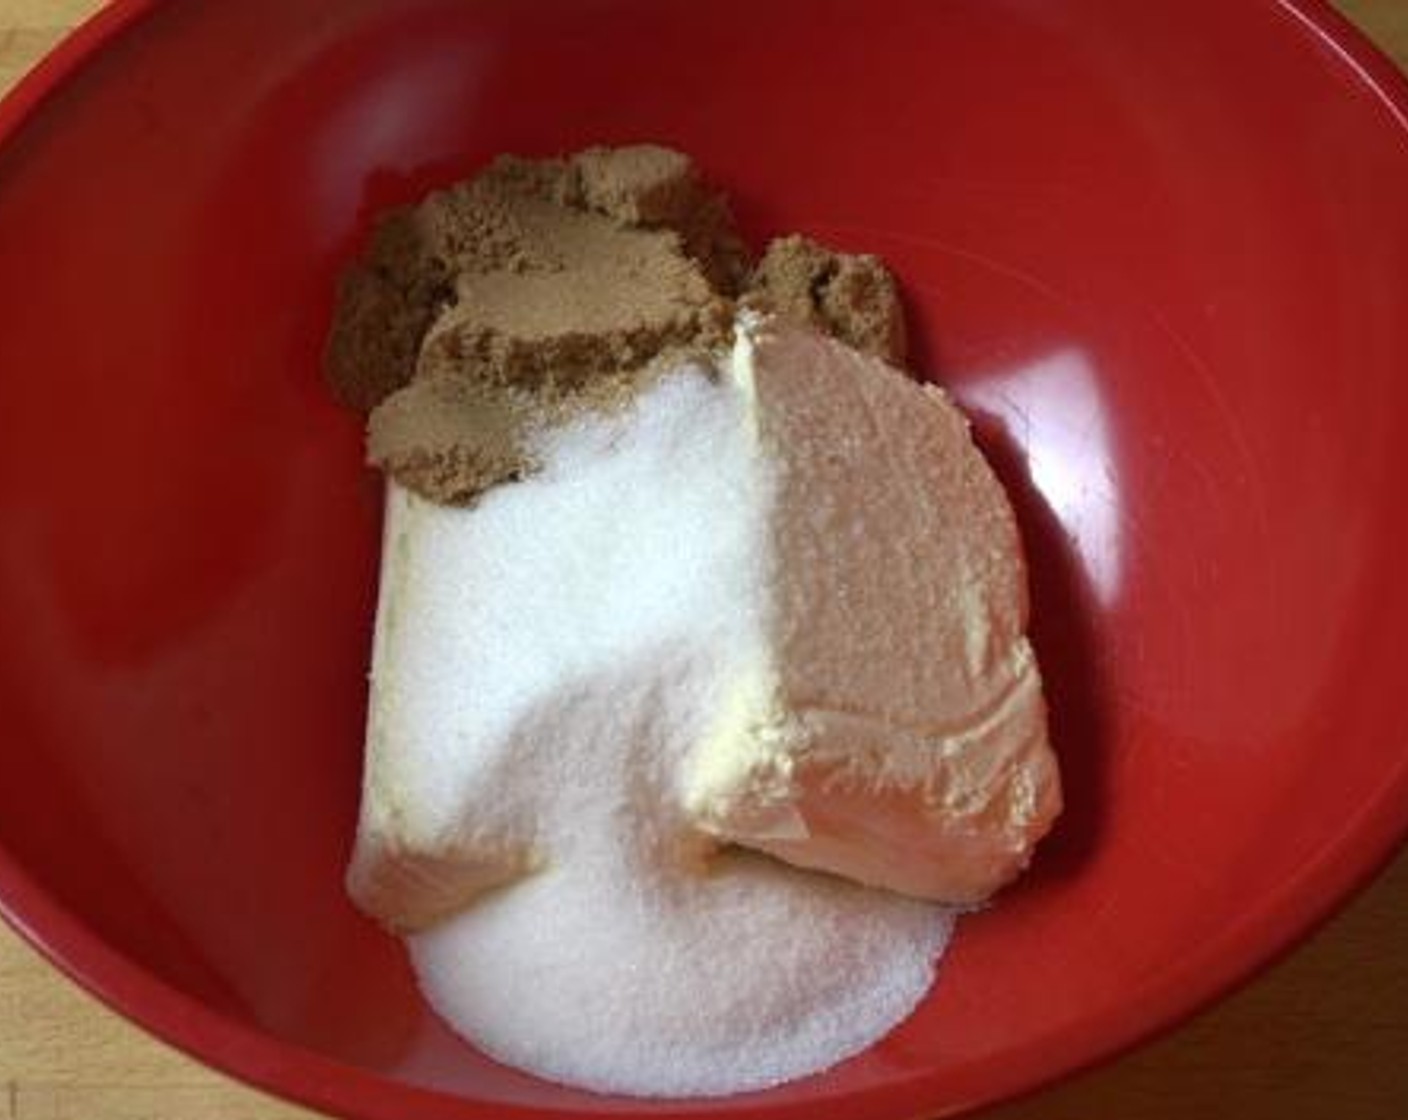 step 4 In another separate bowl, mix together the Philadelphia Original Soft Cheese (2 pckg), Brown Sugar (1/2 cup), Caster Sugar (1/2 cup) until they are nice and creamy.